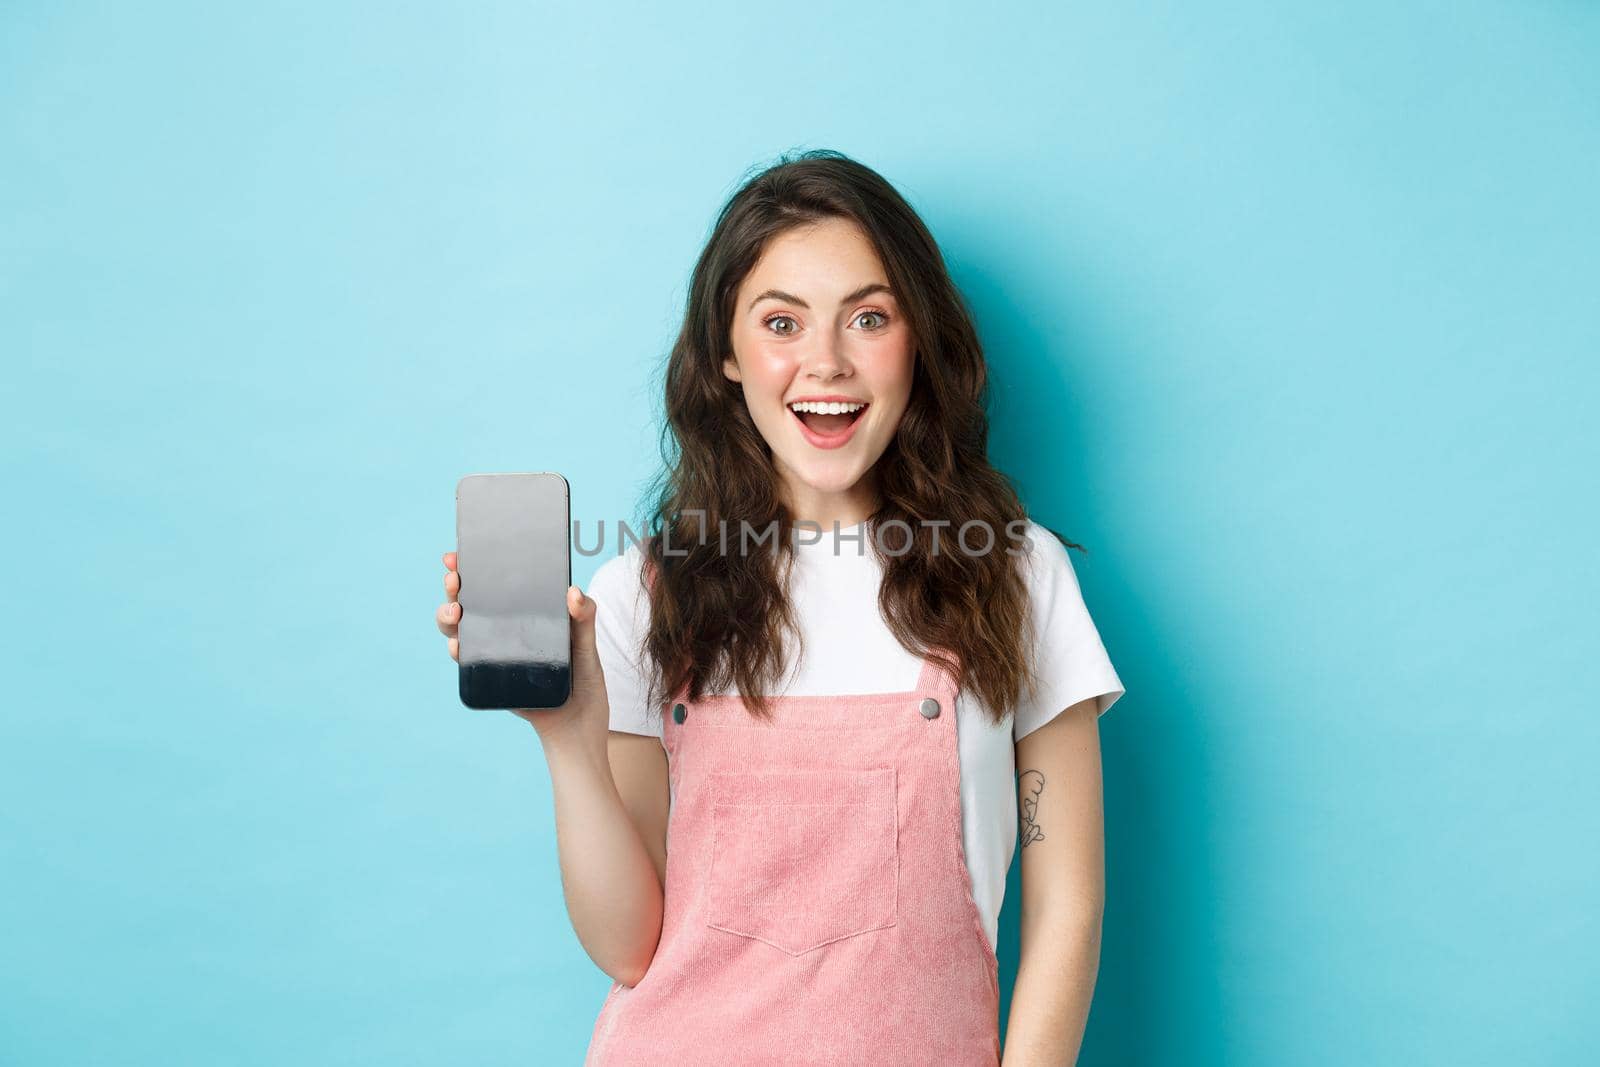 Image of beautiful young woman look surprised and excited, showing empty smartphone screen, your logo or app on mobile display, standing over blue background.